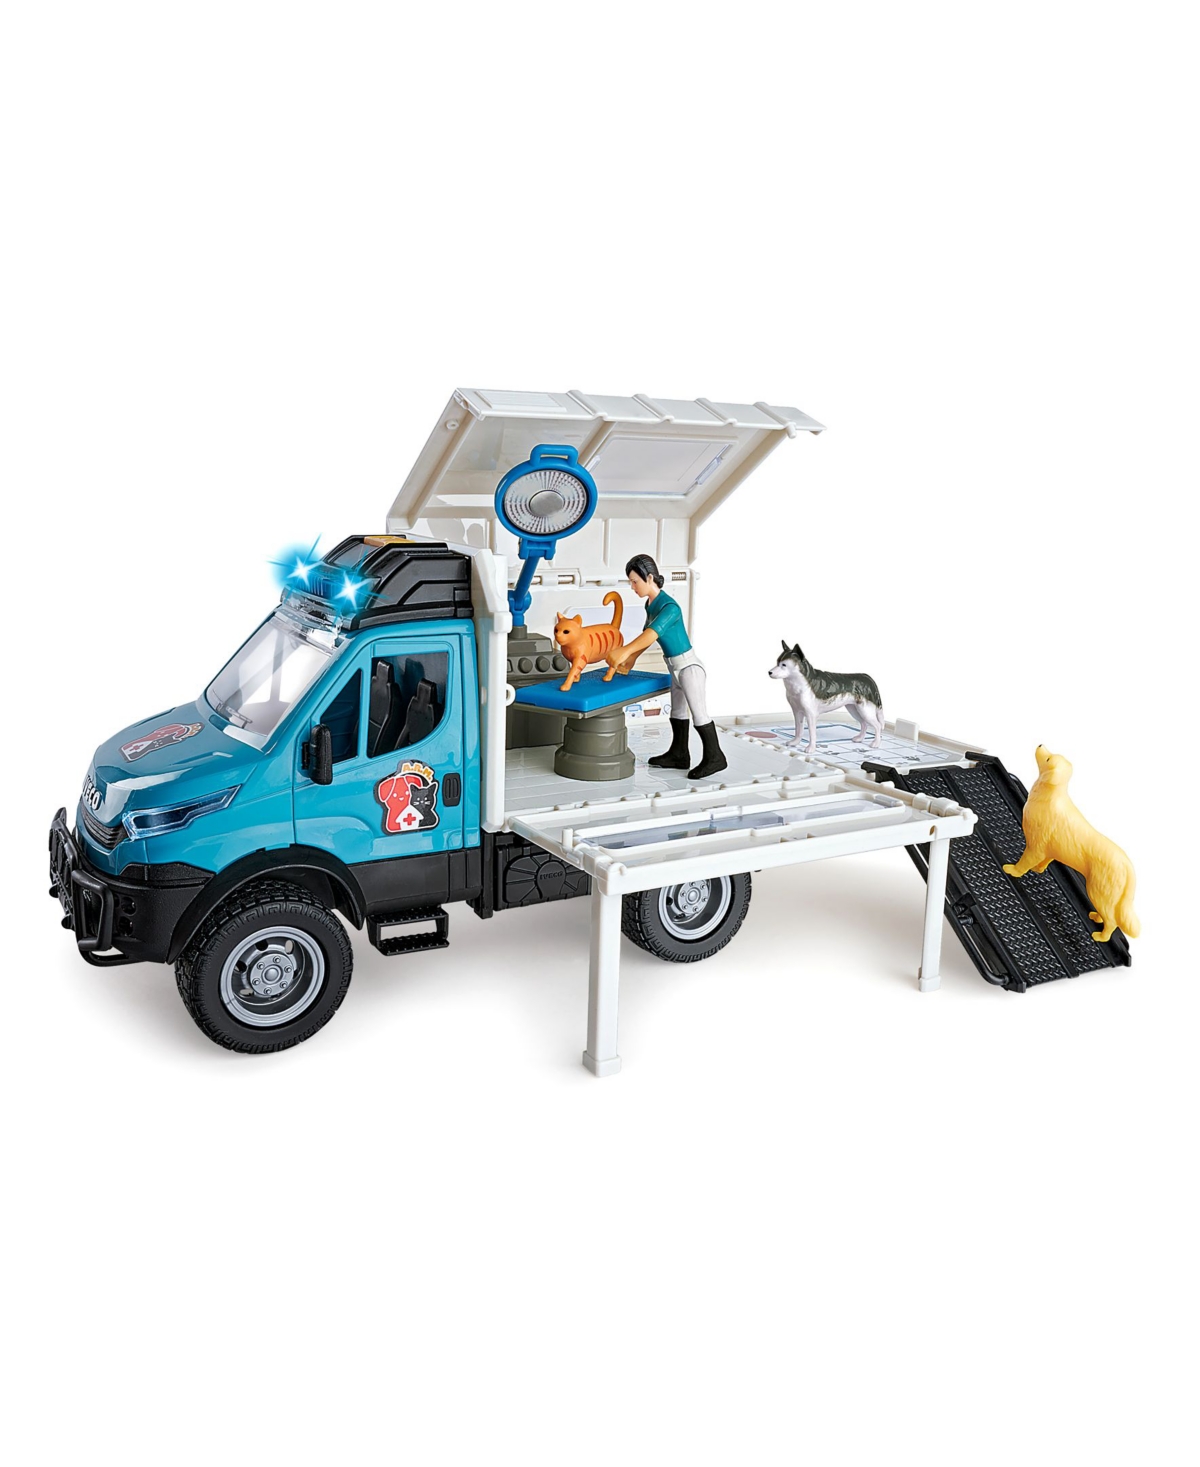 Shop Dickie Toys Hk Ltd - Light Sound Iveco Animal Rescue Playset In Multi